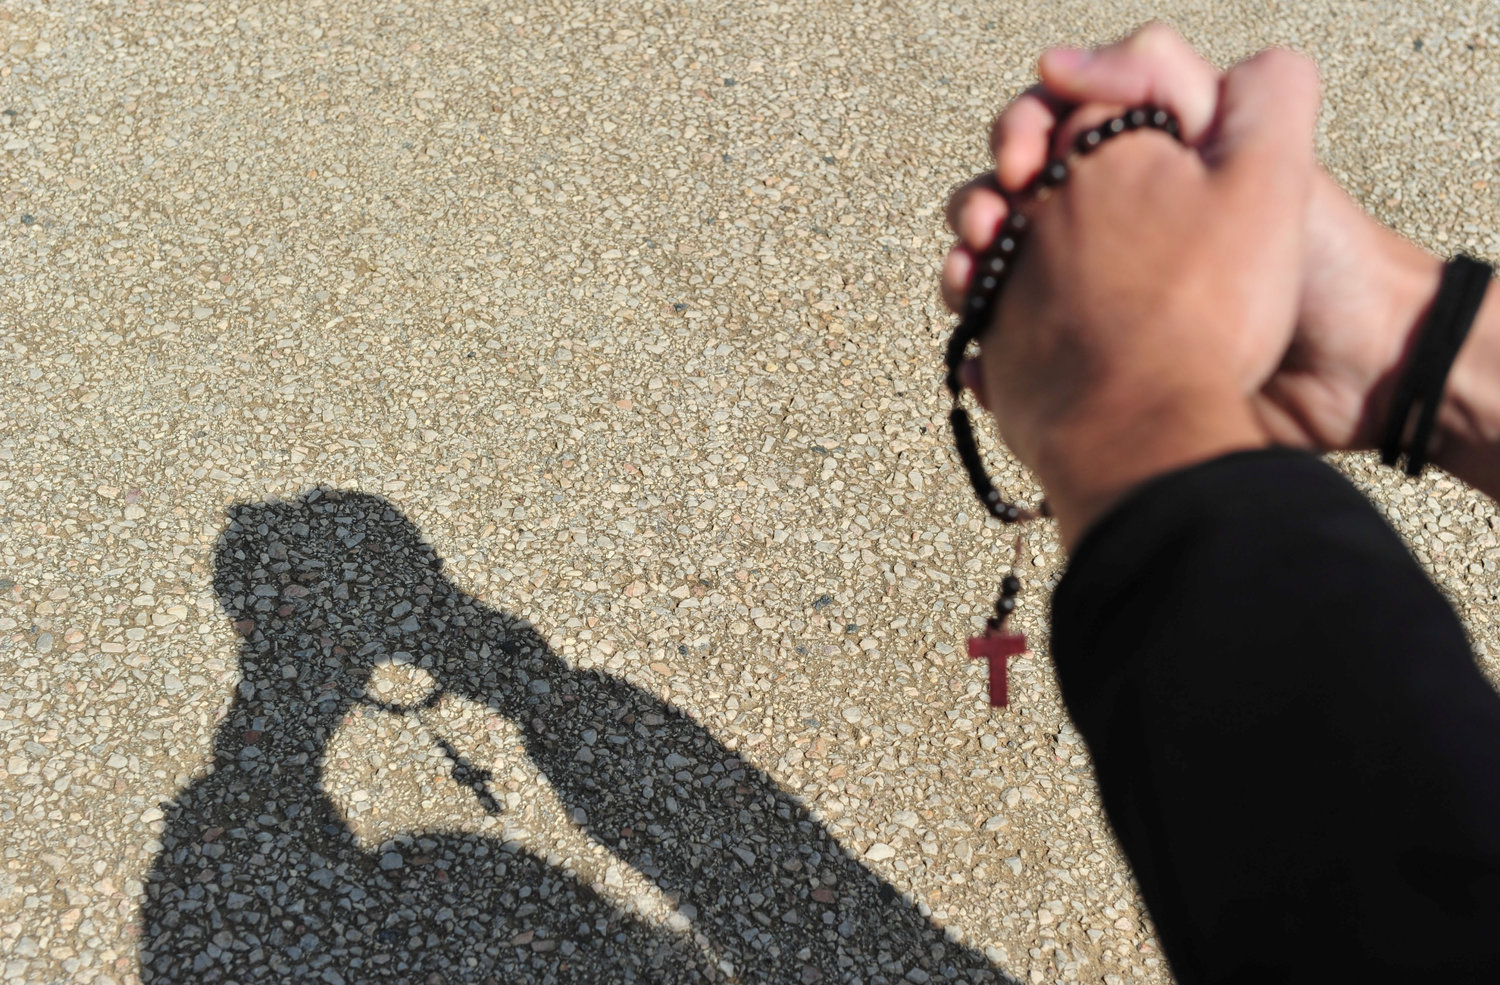 A shadow is cast as a young person prays with a rosary in Grosseto, Italy, March 25, 2020. Joined by Orthodox, Anglican and Protestant church leaders and faithful from around the world that day, Pope Francis led the recitation of the Lord's Prayer, imploring God's mercy on humanity amid the coronavirus pandemic. (CNS photo/Jennifer Lorenzini, Reuters) See POPE-GLOBAL-PRAYER March 25, 2020.